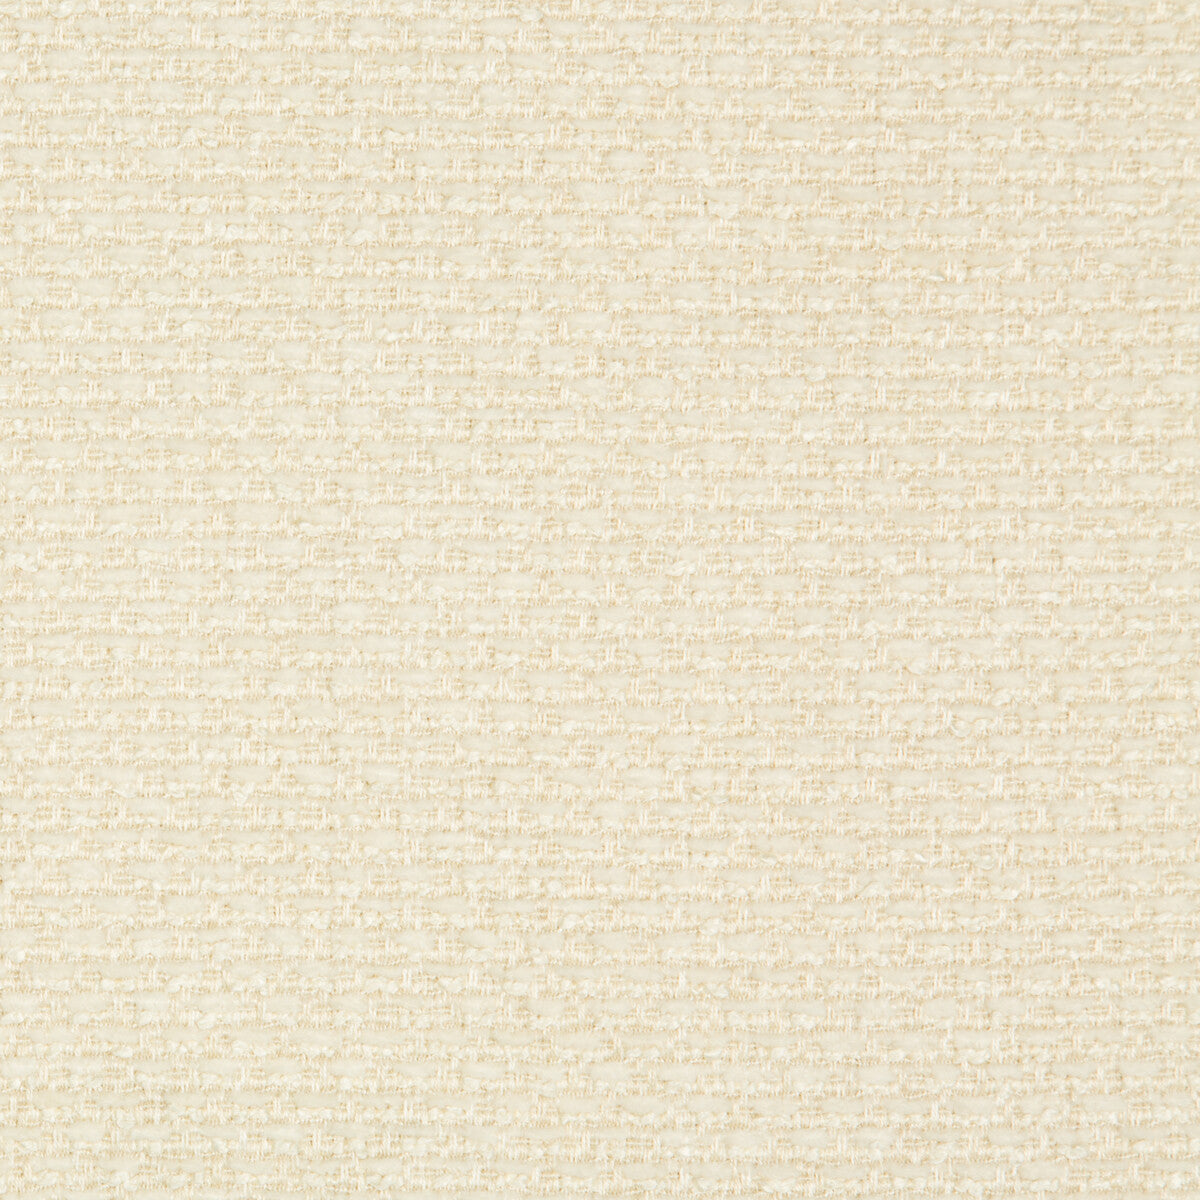 Kravet Contract fabric in 34739-1 color - pattern 34739.1.0 - by Kravet Contract in the Crypton Incase collection